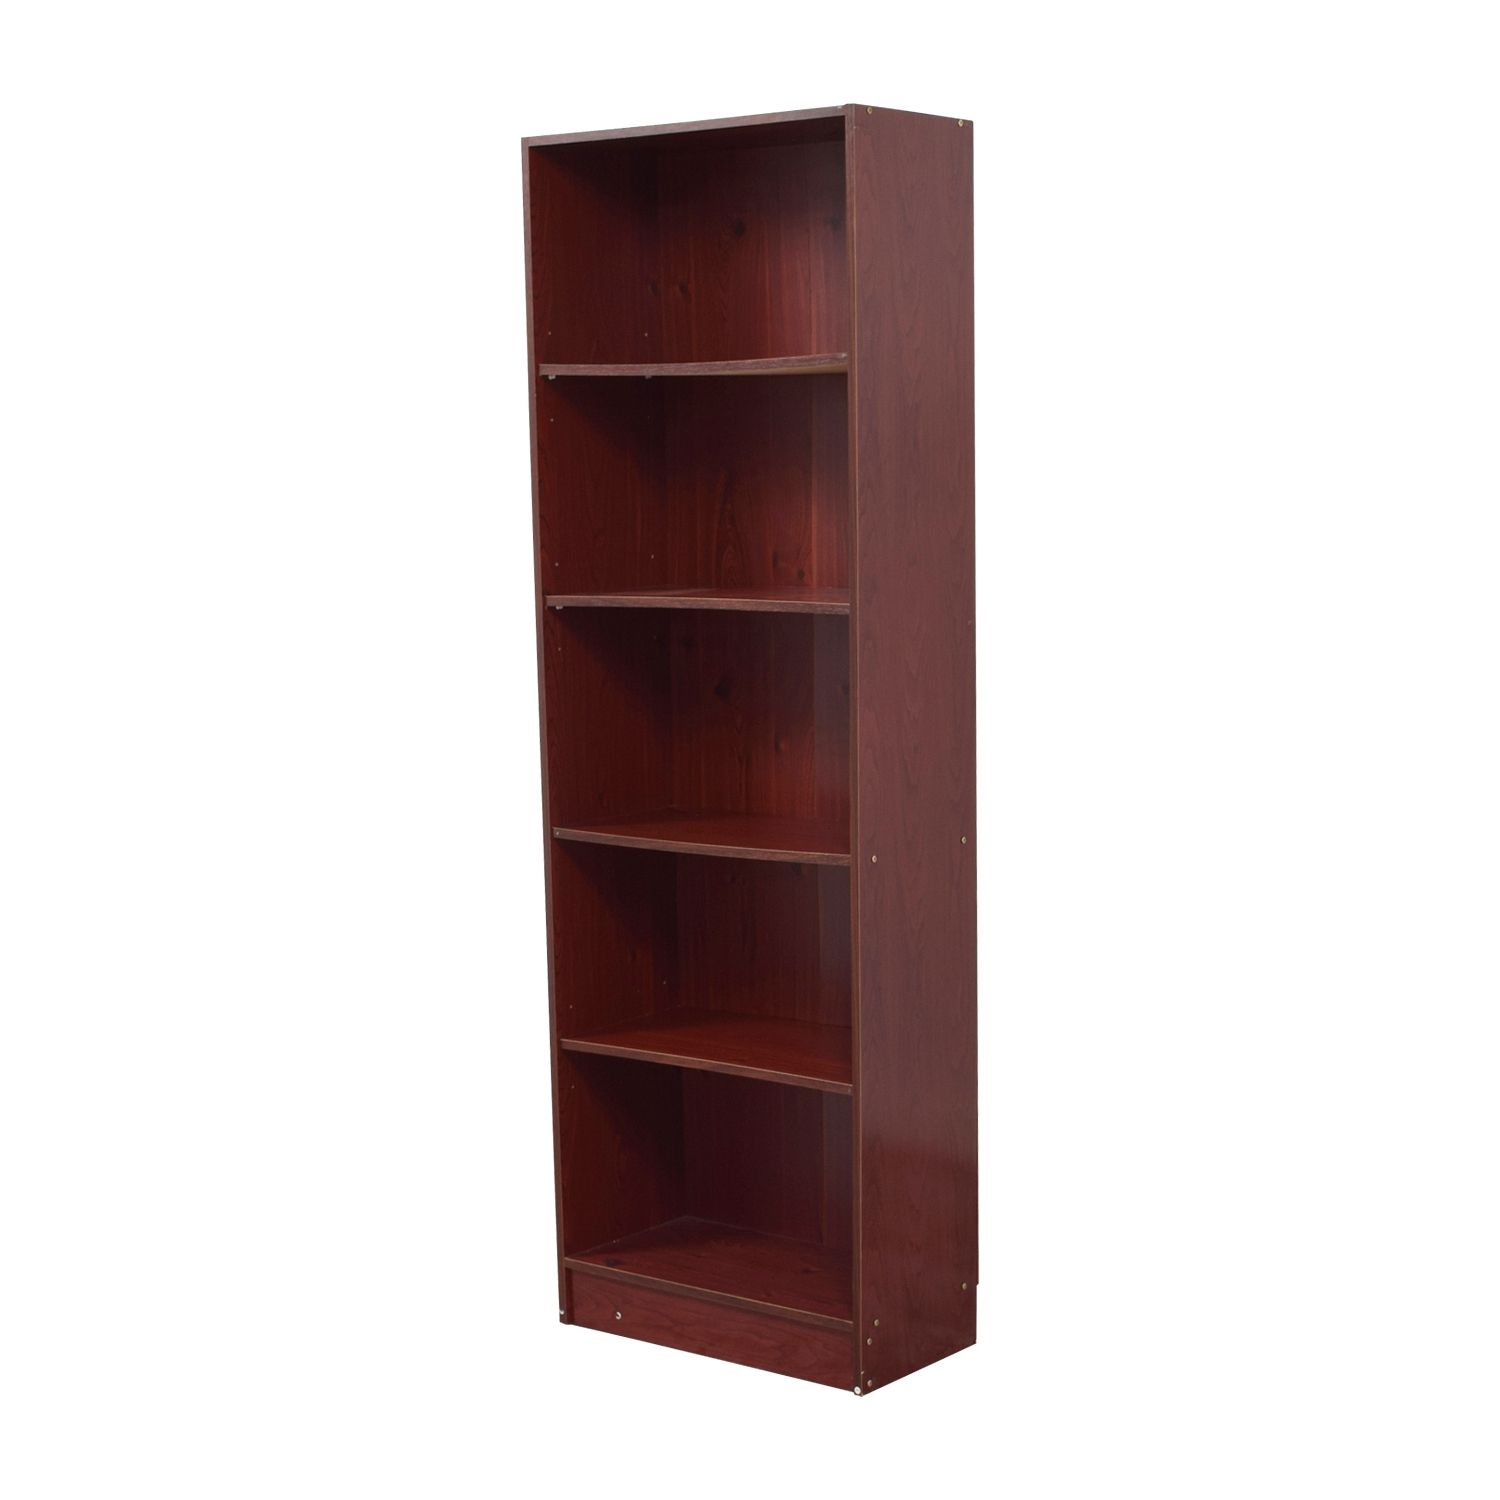 [%78% Off – Tall Wood Five Shelf Bookcase / Storage In 2017 Very Tall Bookcases|very Tall Bookcases Intended For Famous 78% Off – Tall Wood Five Shelf Bookcase / Storage|most Current Very Tall Bookcases With Regard To 78% Off – Tall Wood Five Shelf Bookcase / Storage|most Up To Date 78% Off – Tall Wood Five Shelf Bookcase / Storage With Very Tall Bookcases%] (View 12 of 15)